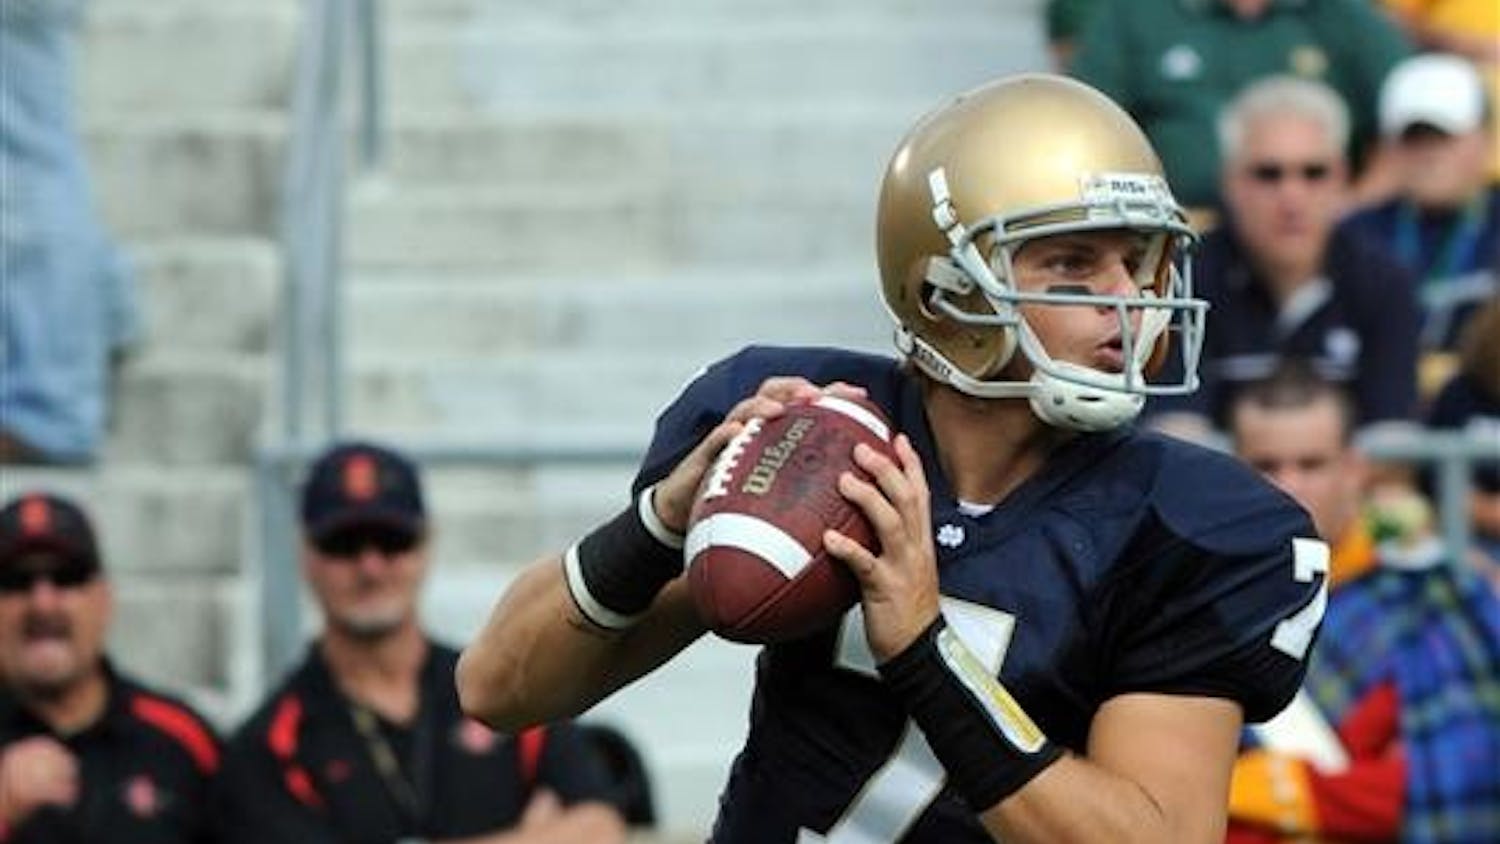 Notre Dame quarterback Jimmy Clausen drops back to throw a pass during the Irish 21-13 victory over San Diego State on Saturday in South Bend, Ind. This week, Notre Dame faces rival Michigan in South Bend.